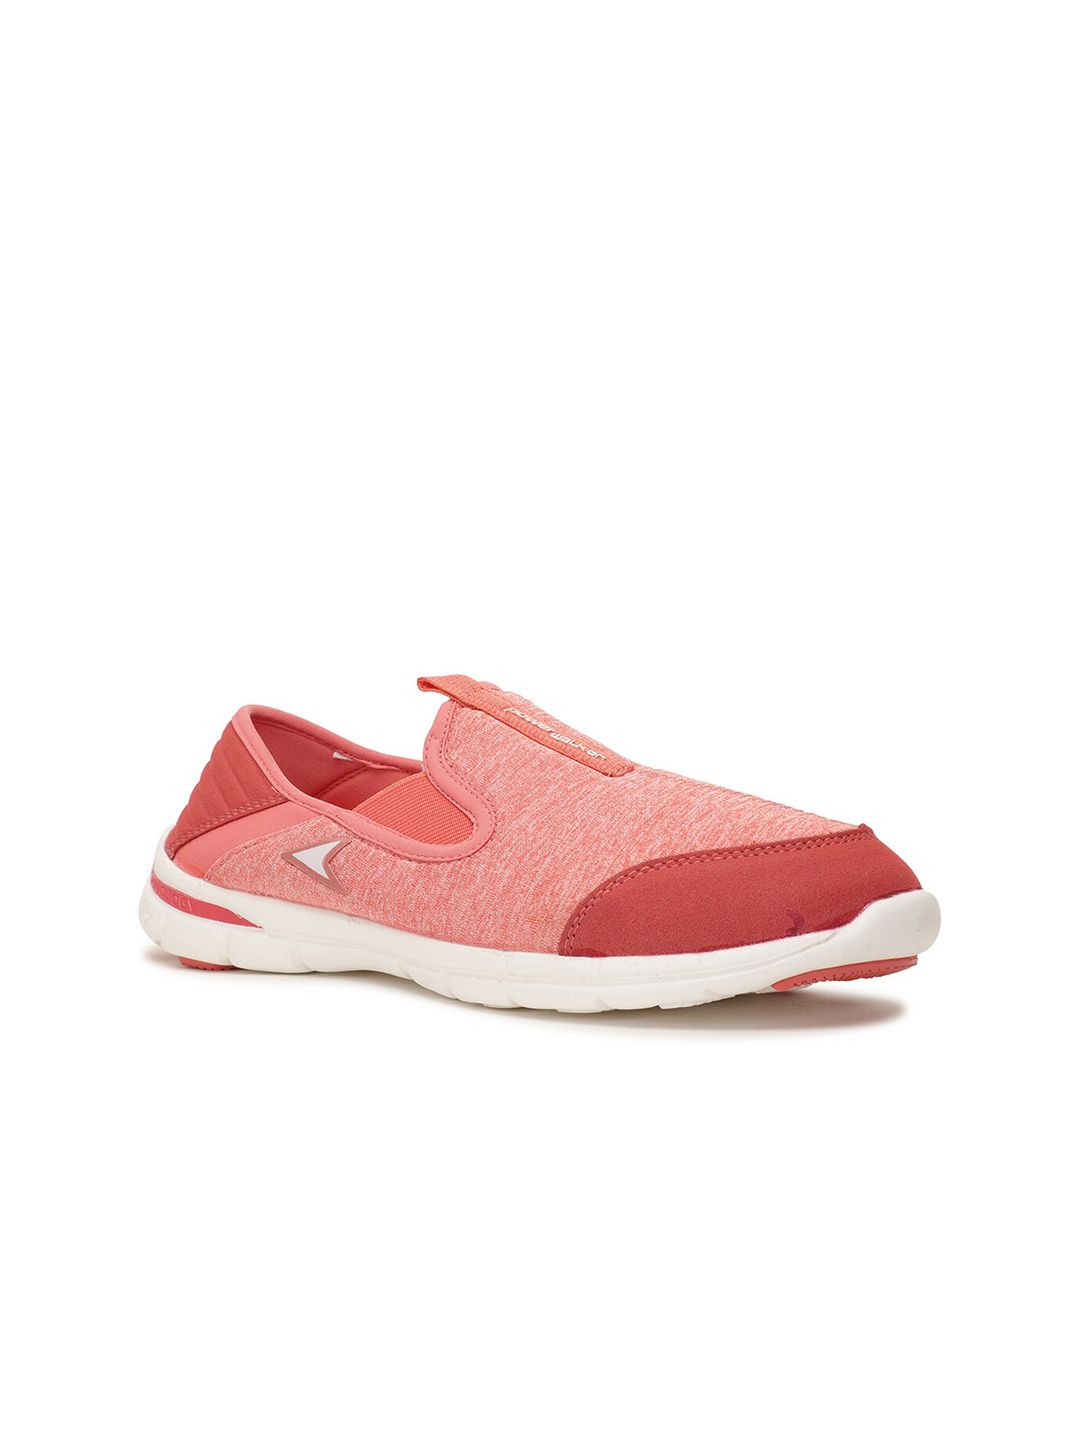 Power Women Peach-Coloured Textile Walking Shoes Price in India